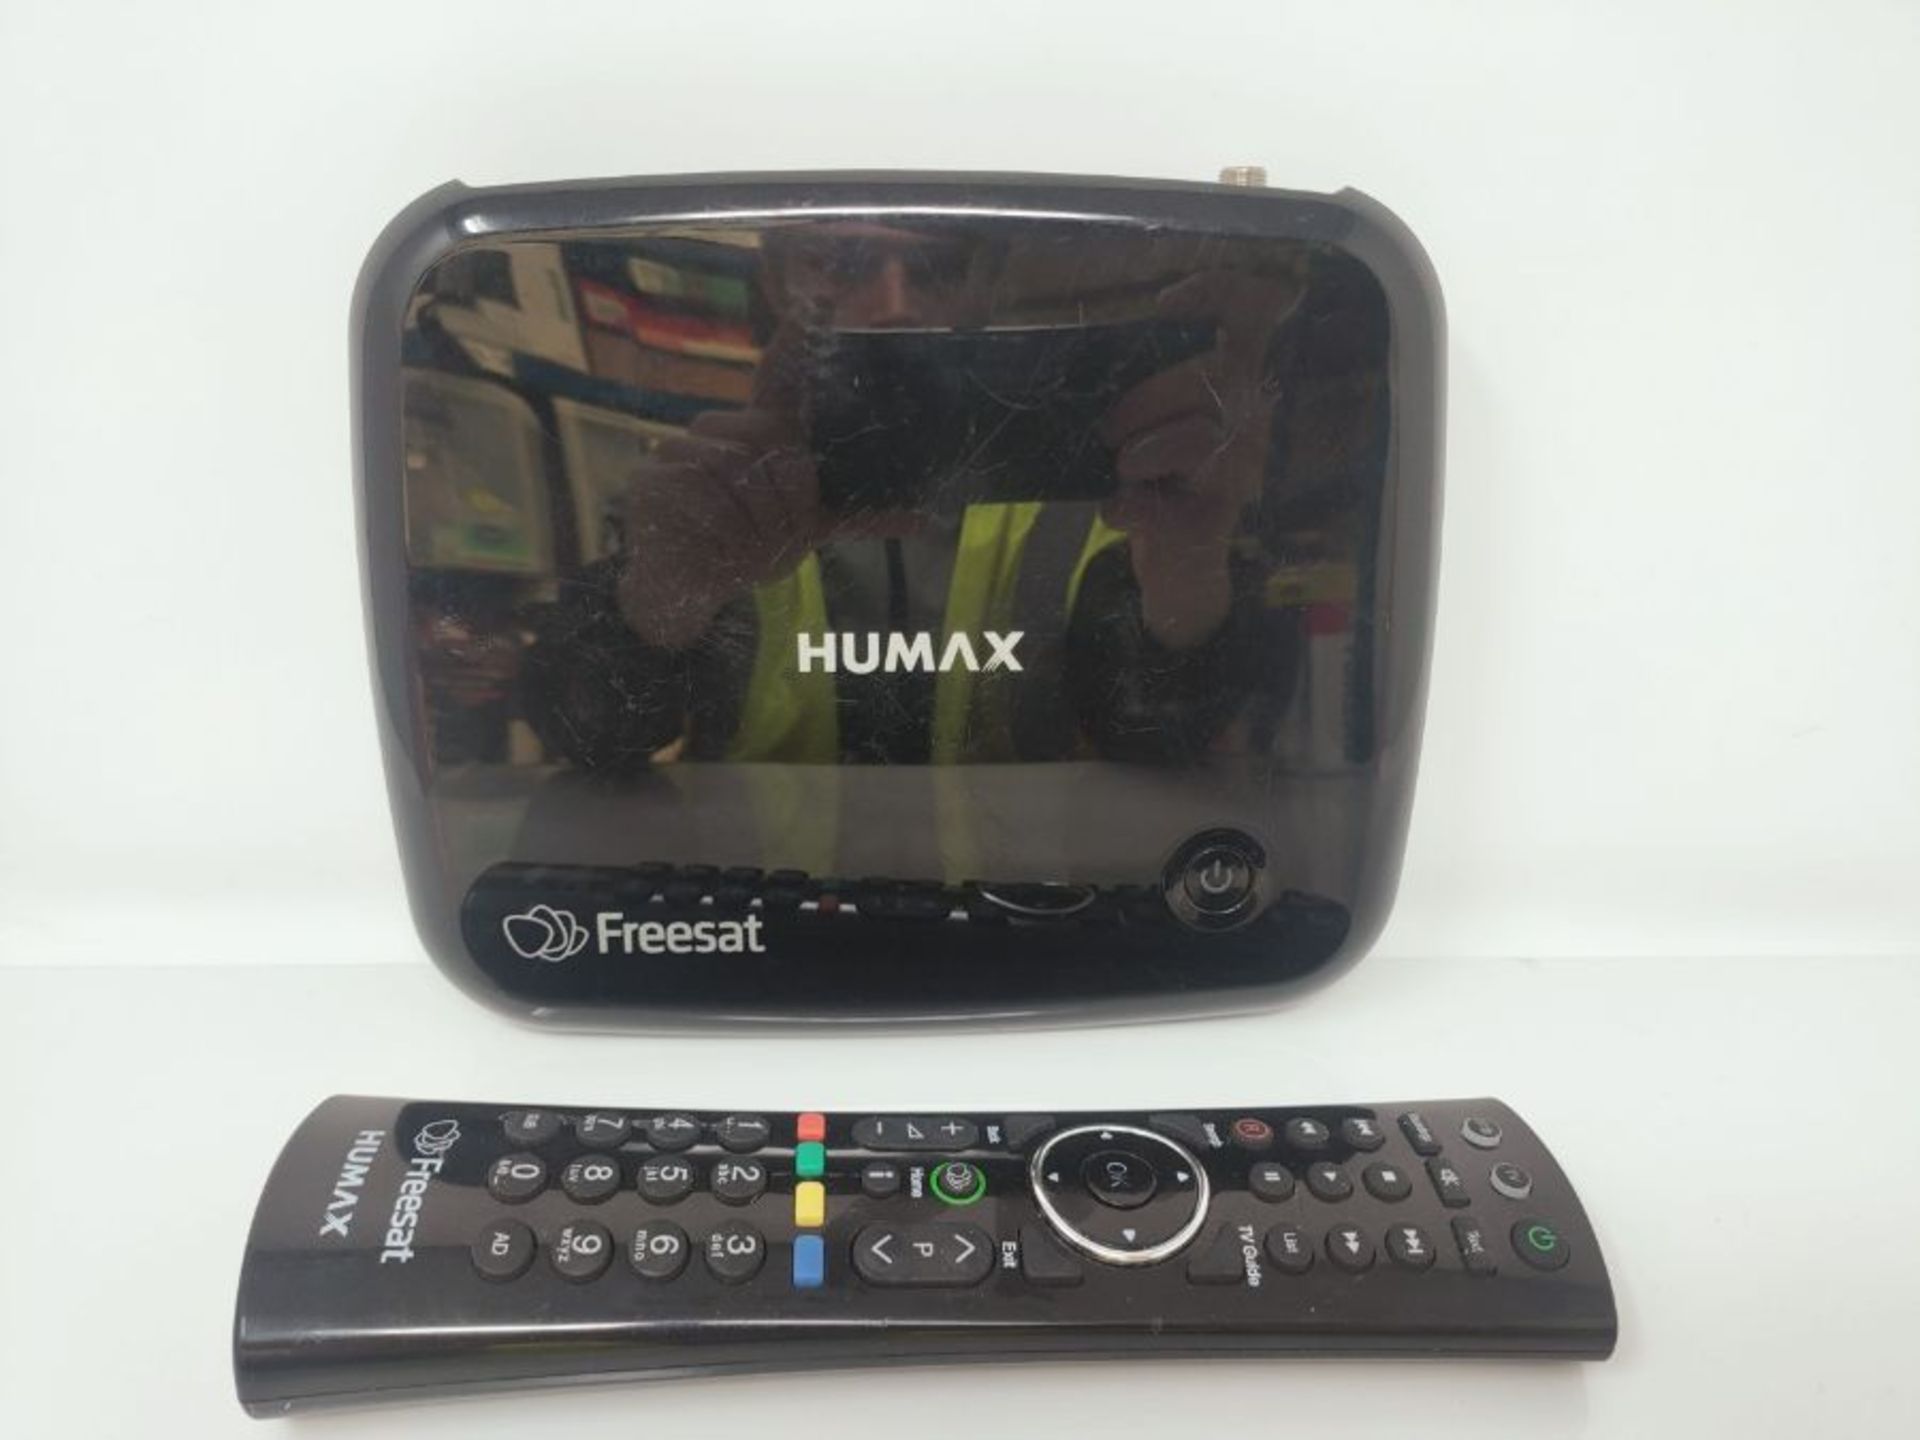 RRP £70.00 Humax HB-1100S Freesat HD TV with Satellite Receiver - Image 5 of 6